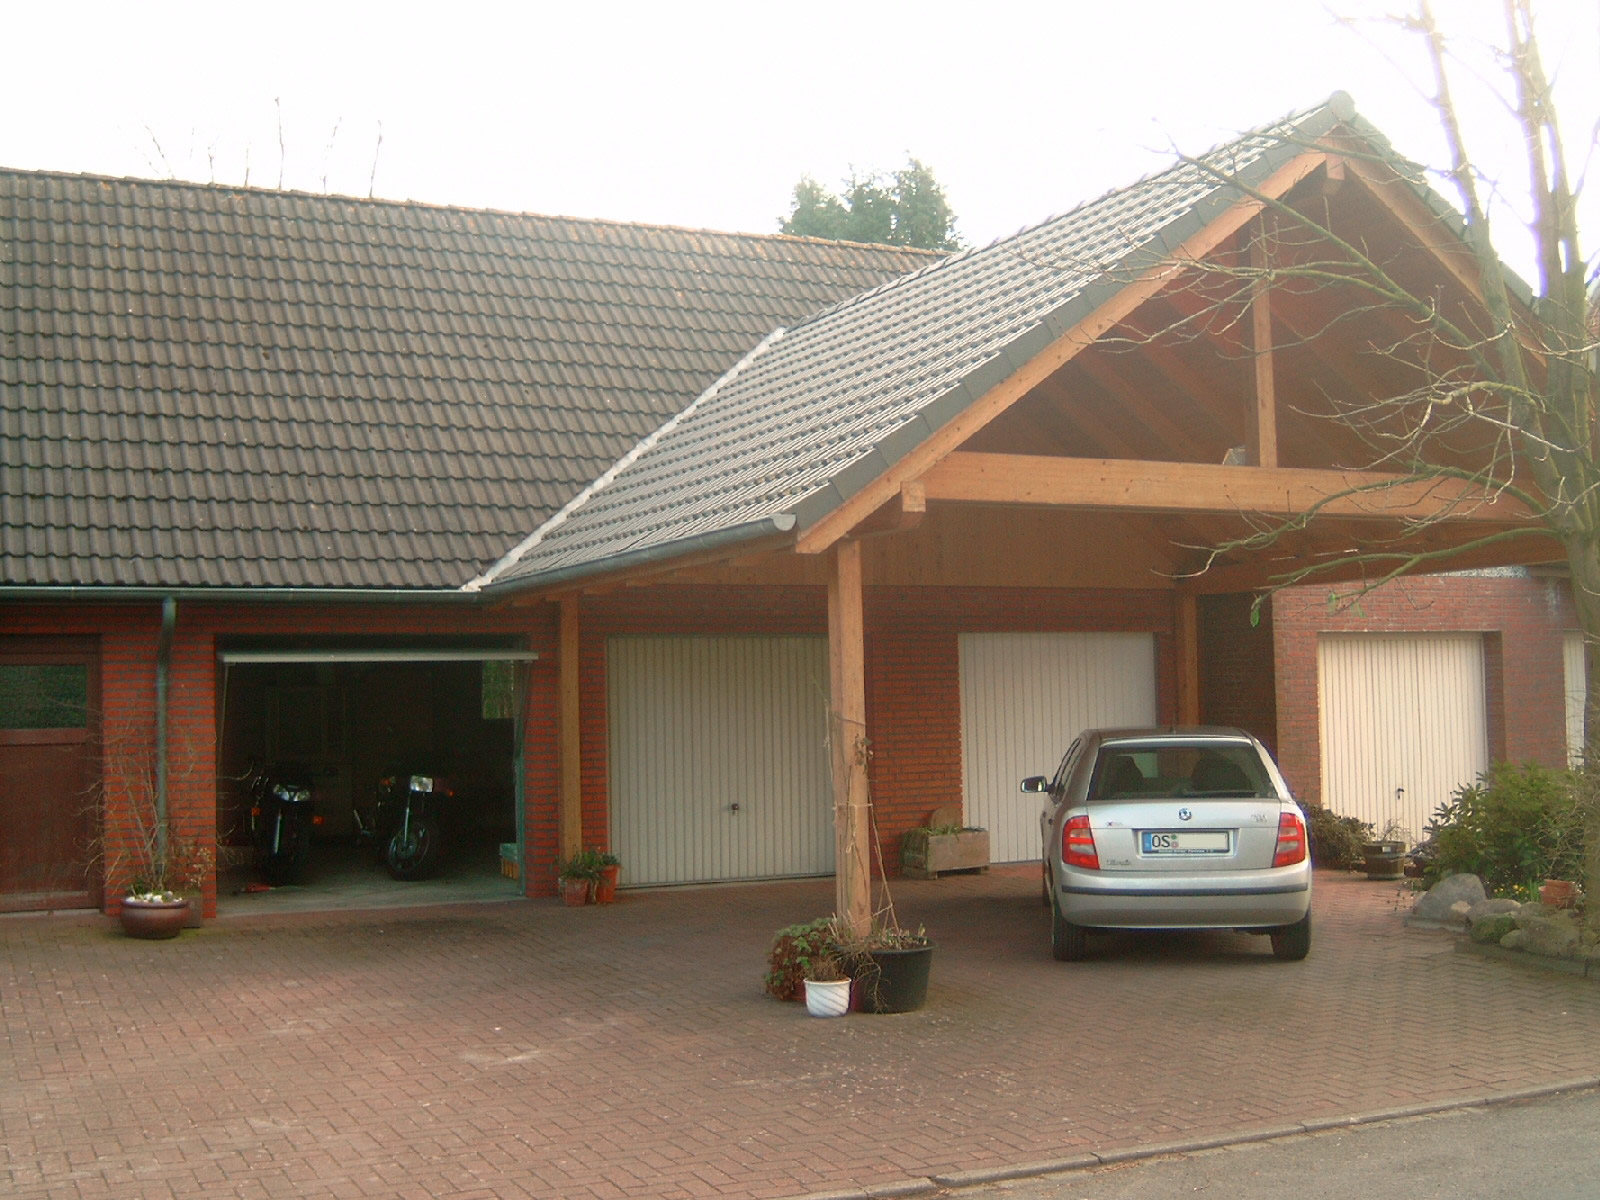 Carport and garage in one setting